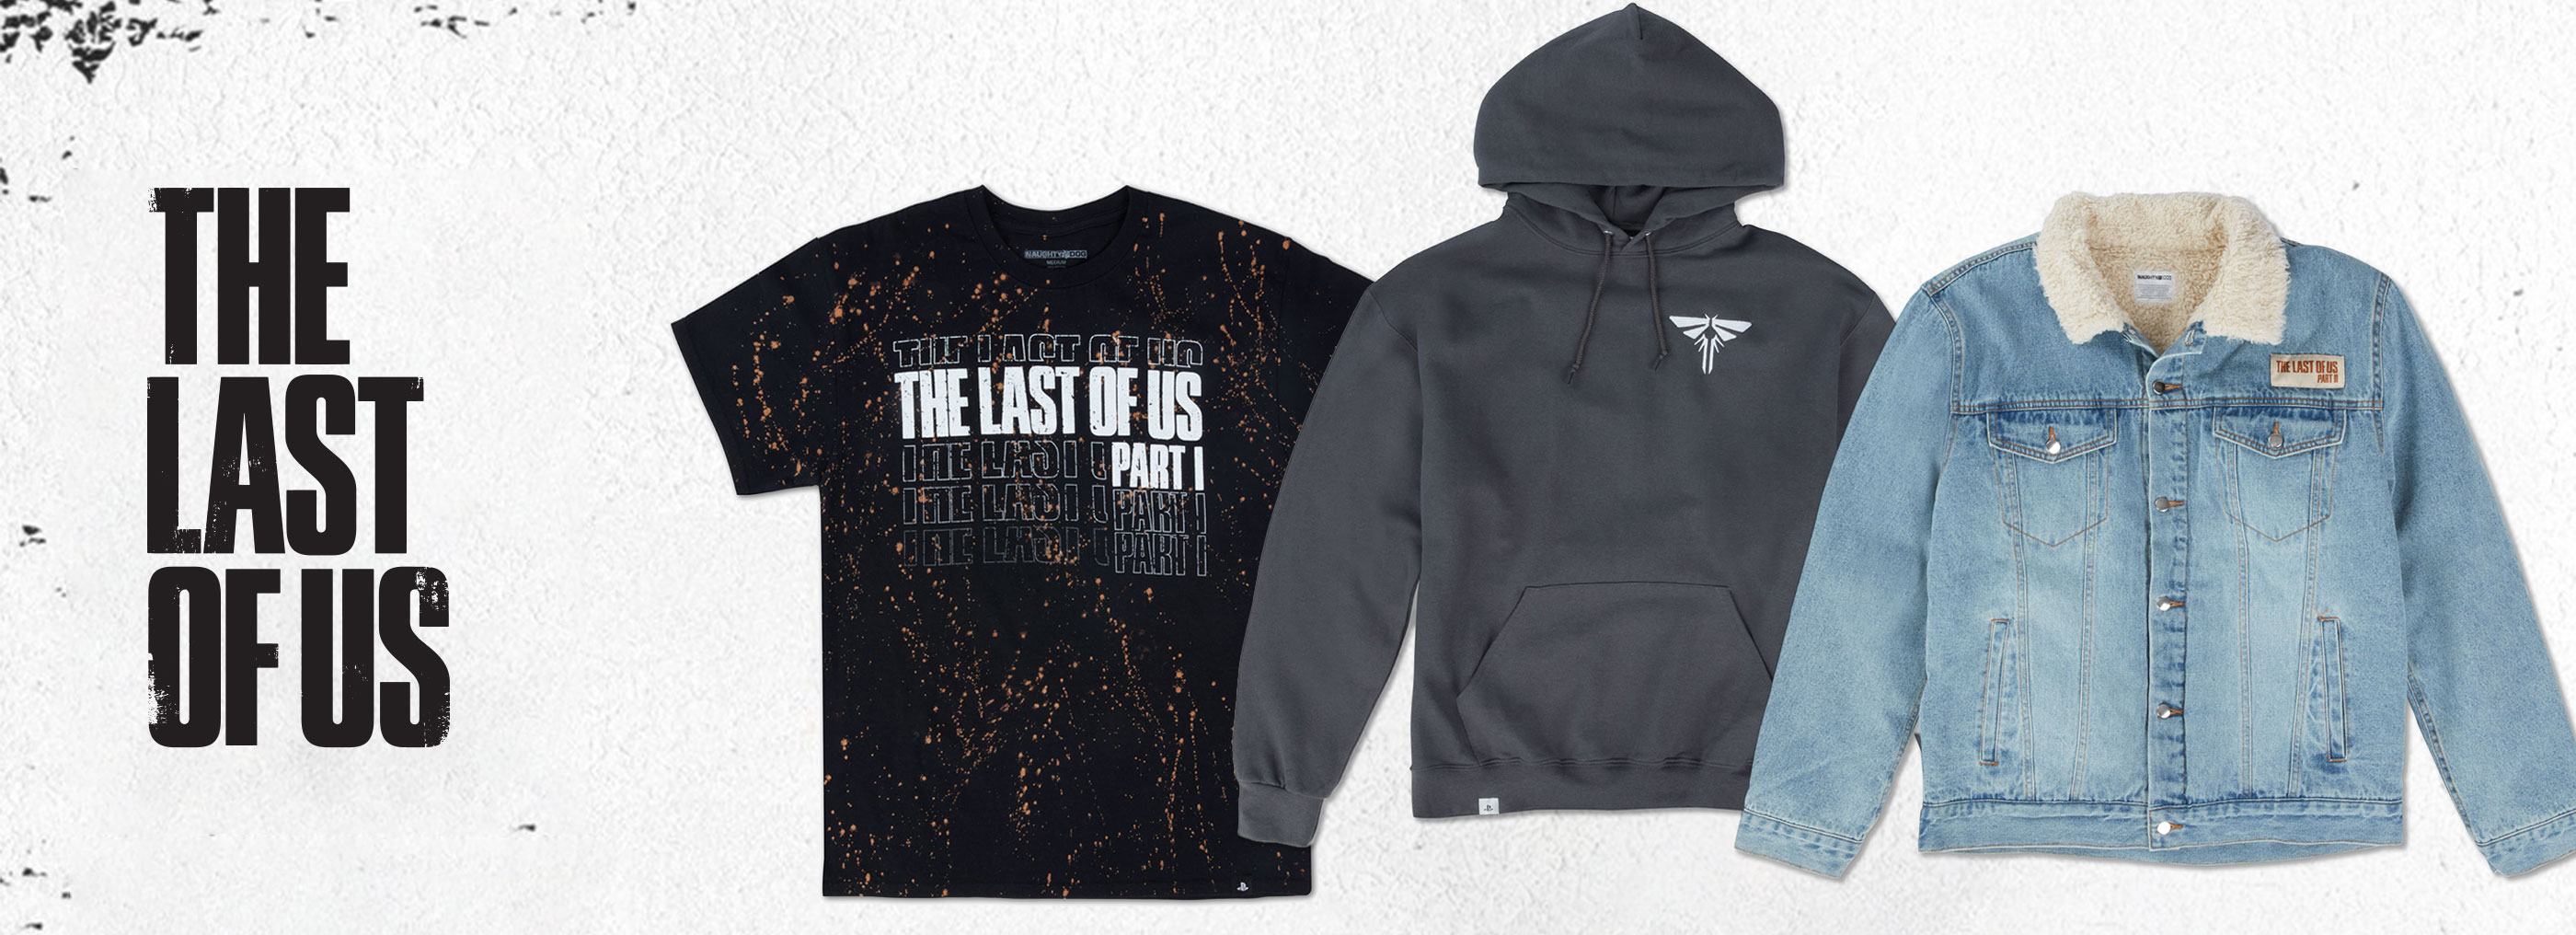 Discover new items from The Last of Us!